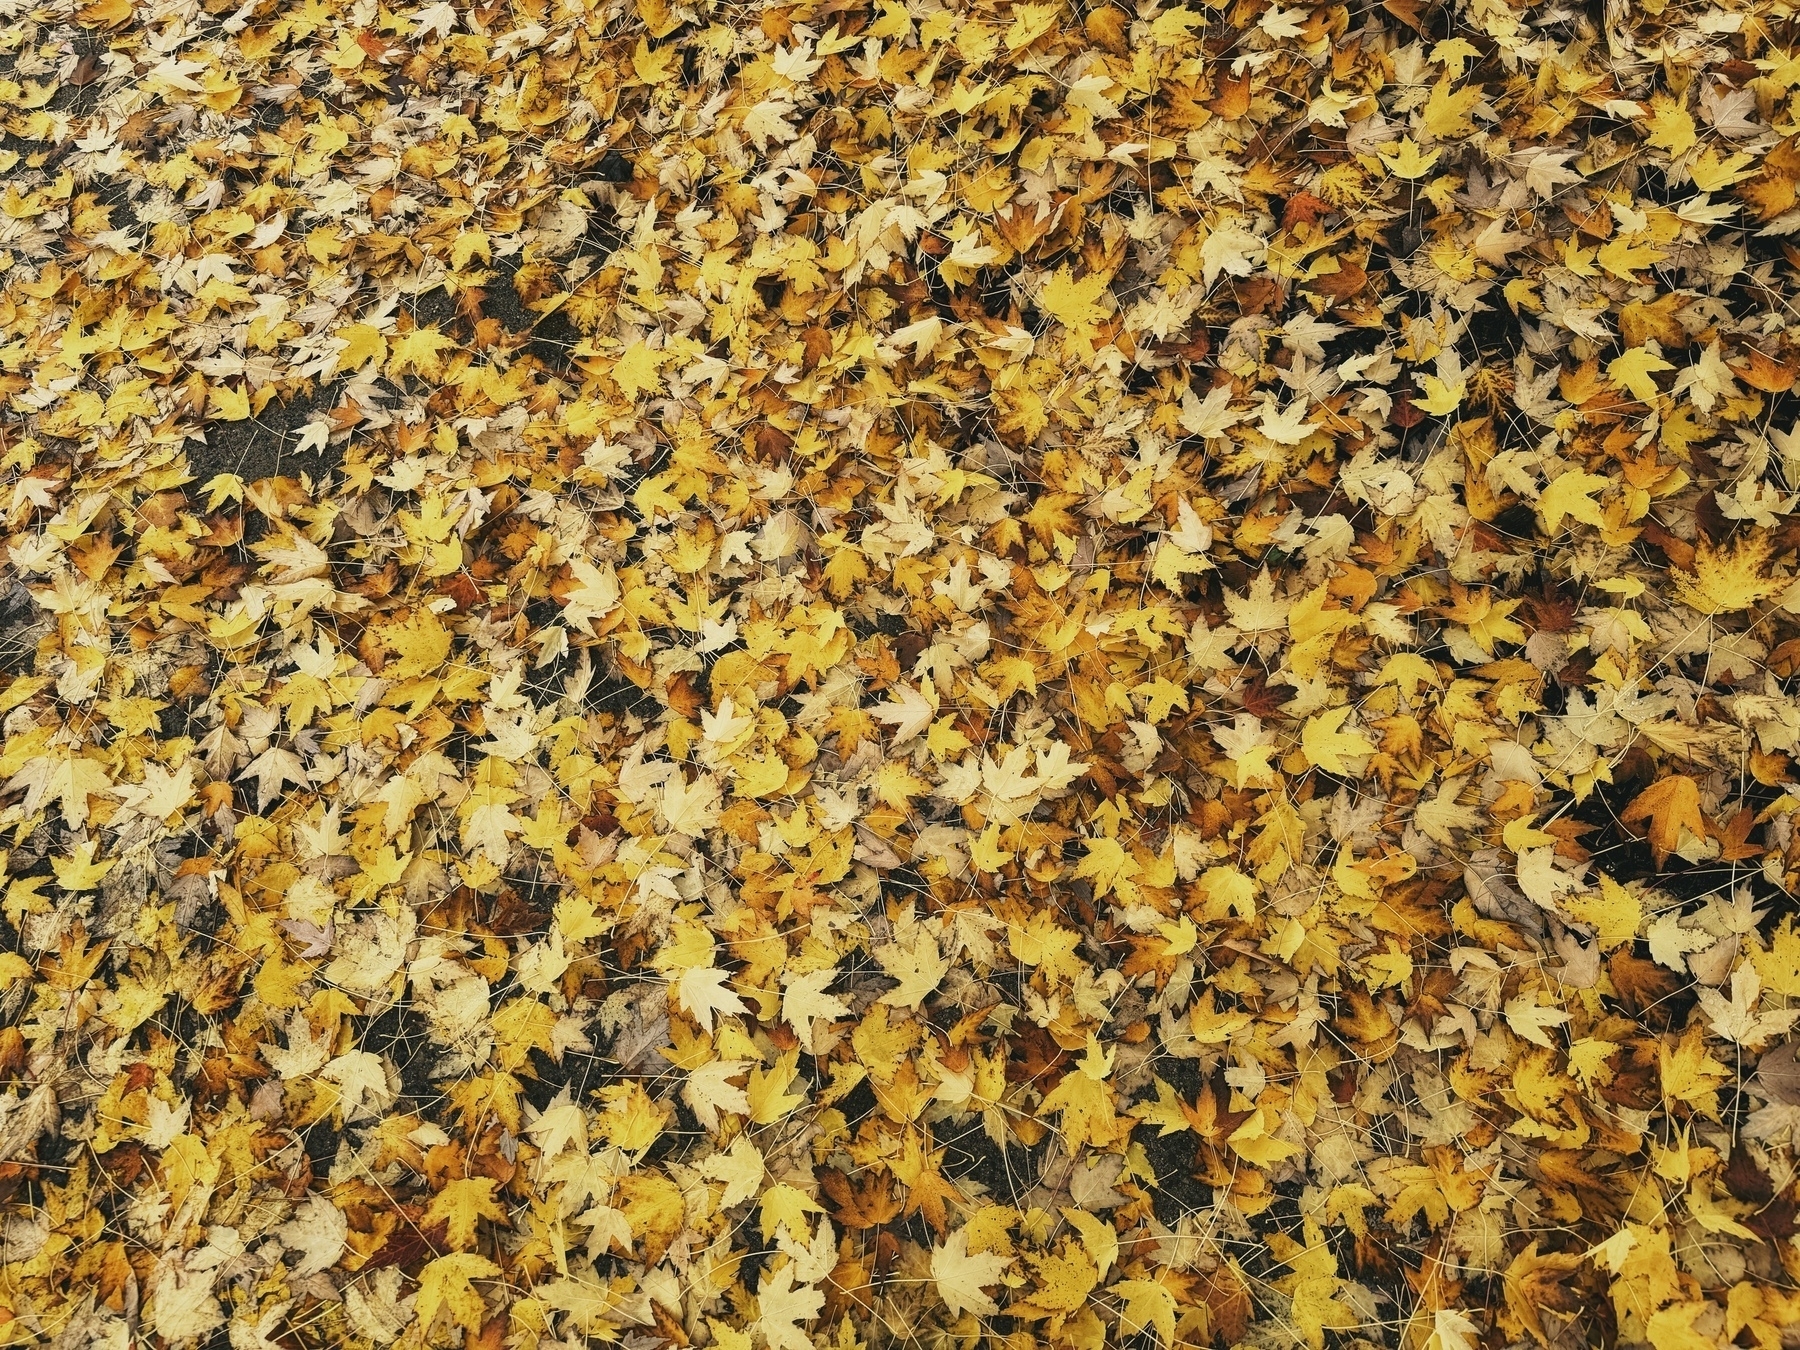 Yellow leaves scattered all over the ground in a dense mess